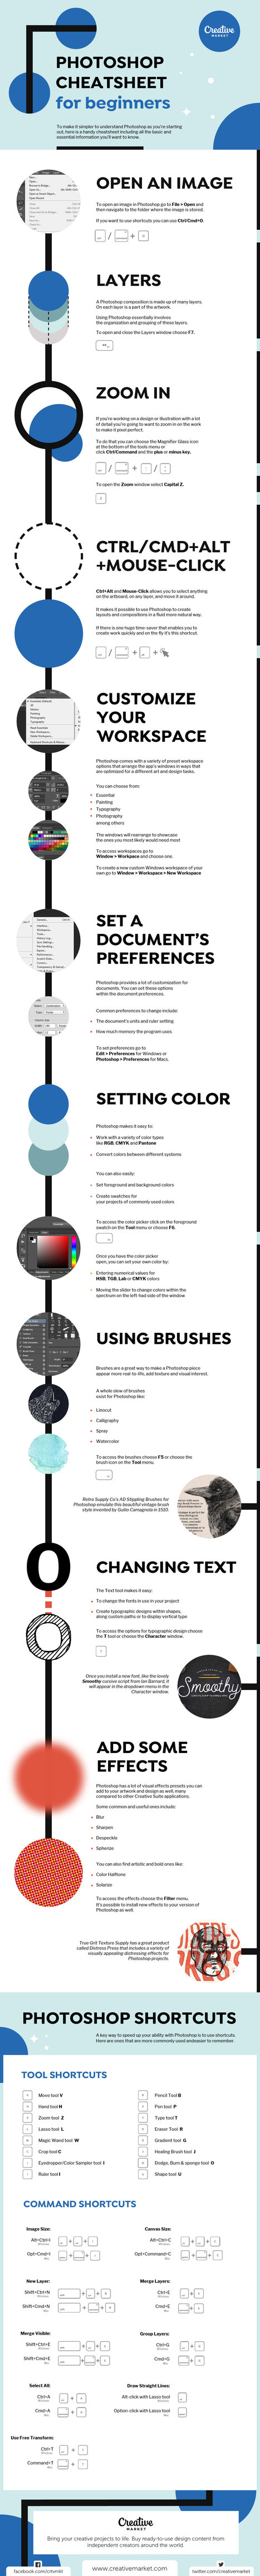 Photoshop Cheatsheet for Beginners | Time to Learn | Scoop.it